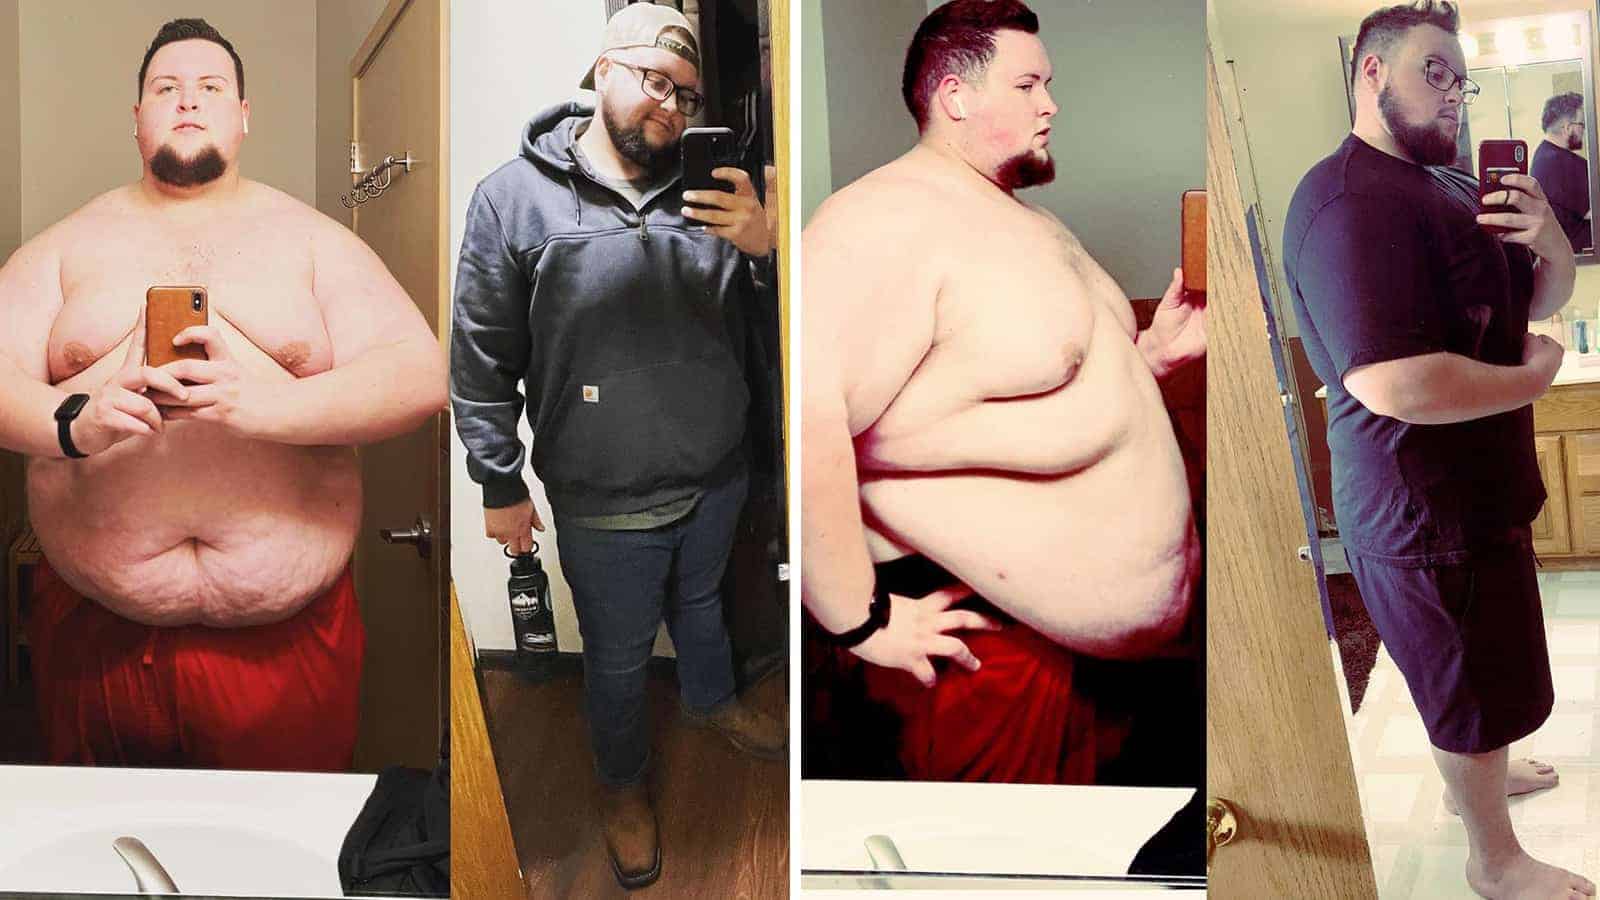 The Inspiring Weight Loss Story of a Man Who Weighed 600 Pounds